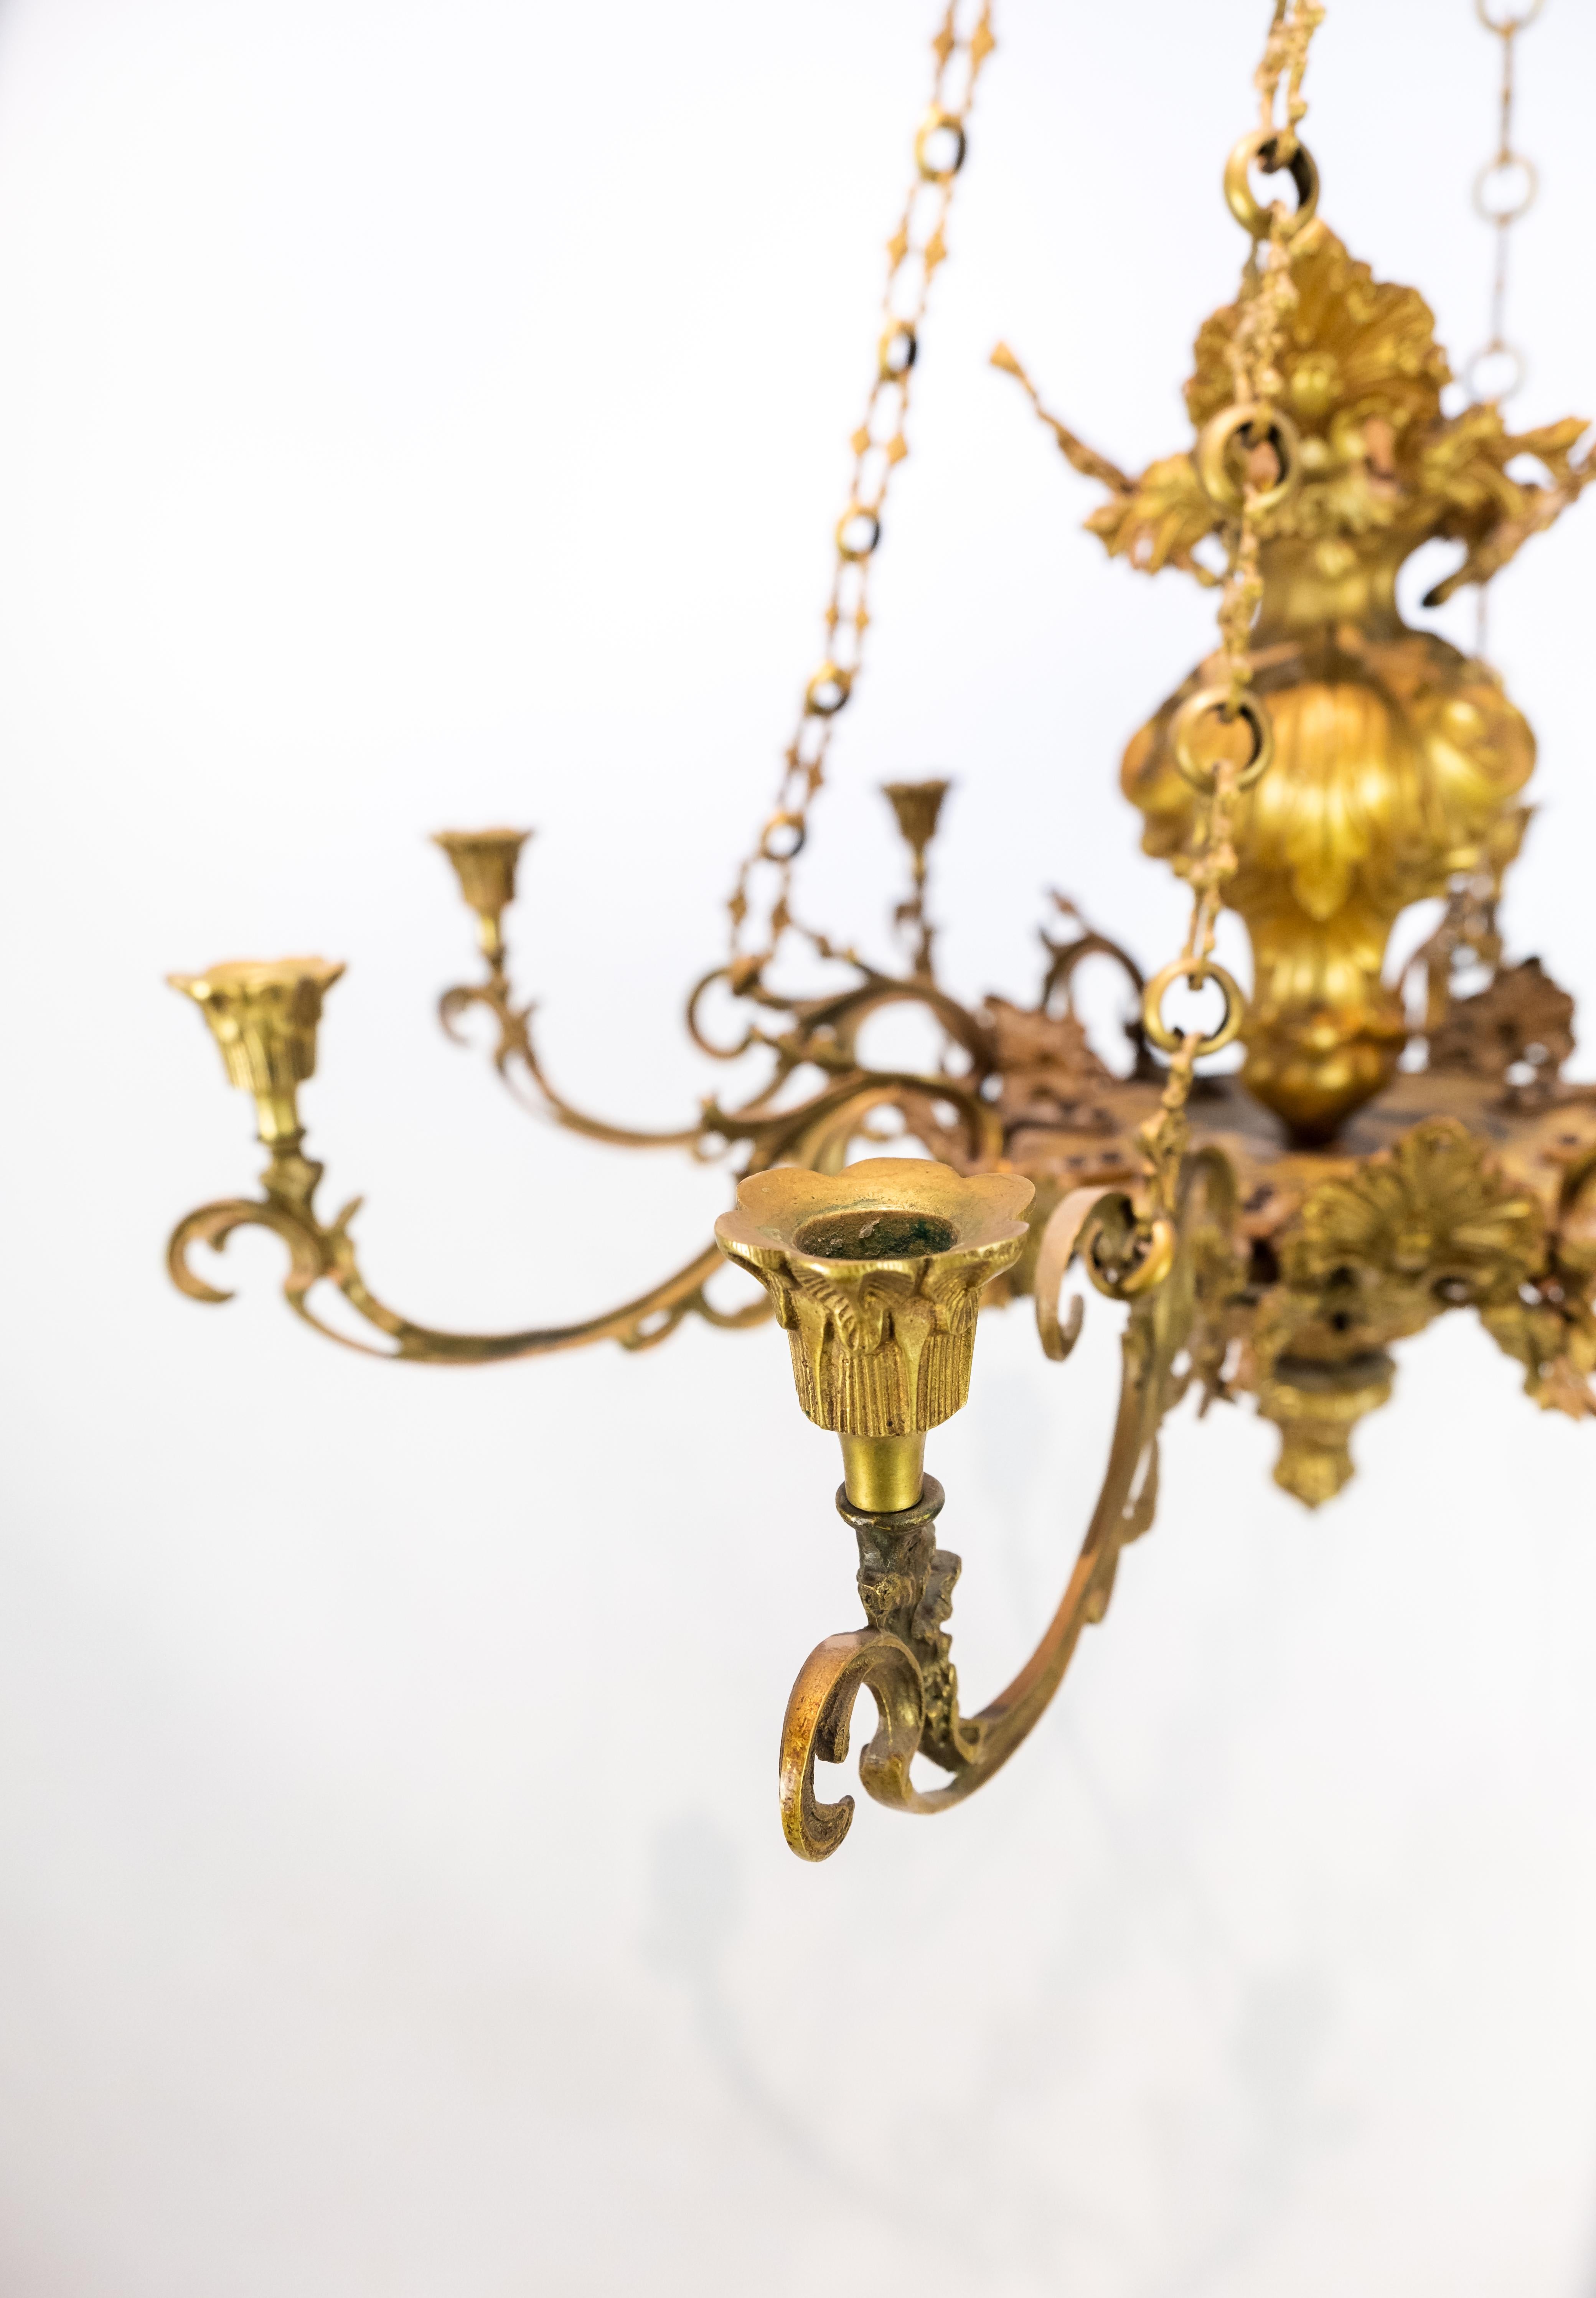 French church chandelier of bronze with beautiful decorations and eight arms for candle lights from circa 1880s. The chandelier is in great antique condition.